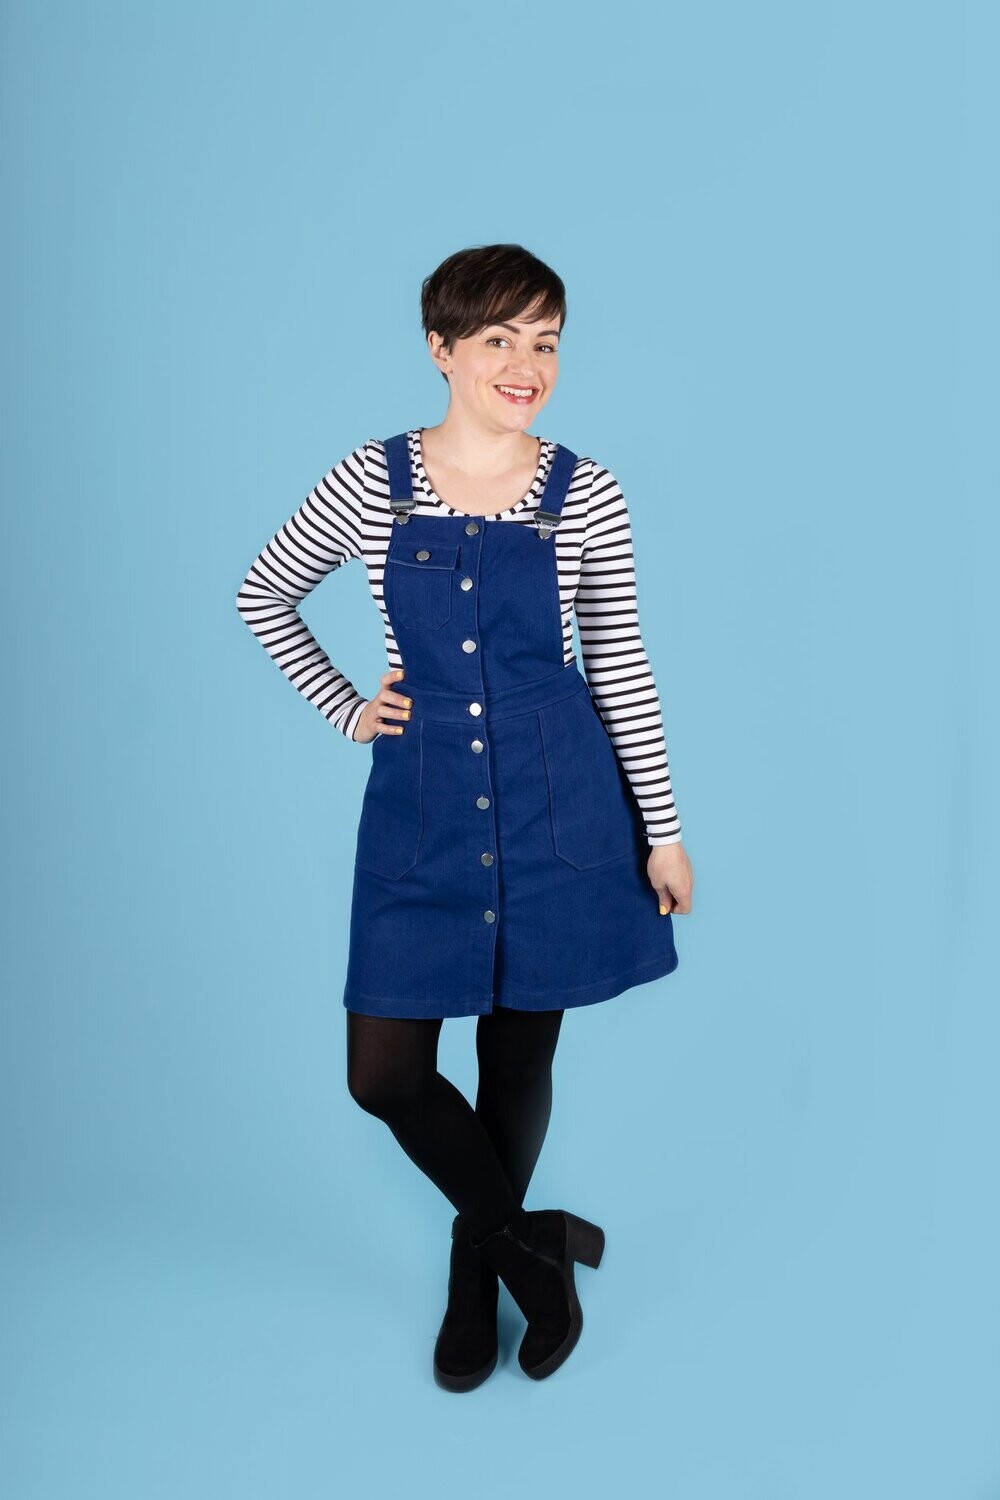 &quot;Bobbi&quot; - Ladies Pinafore or Skirt Dress Pattern by Tilly and the Buttons